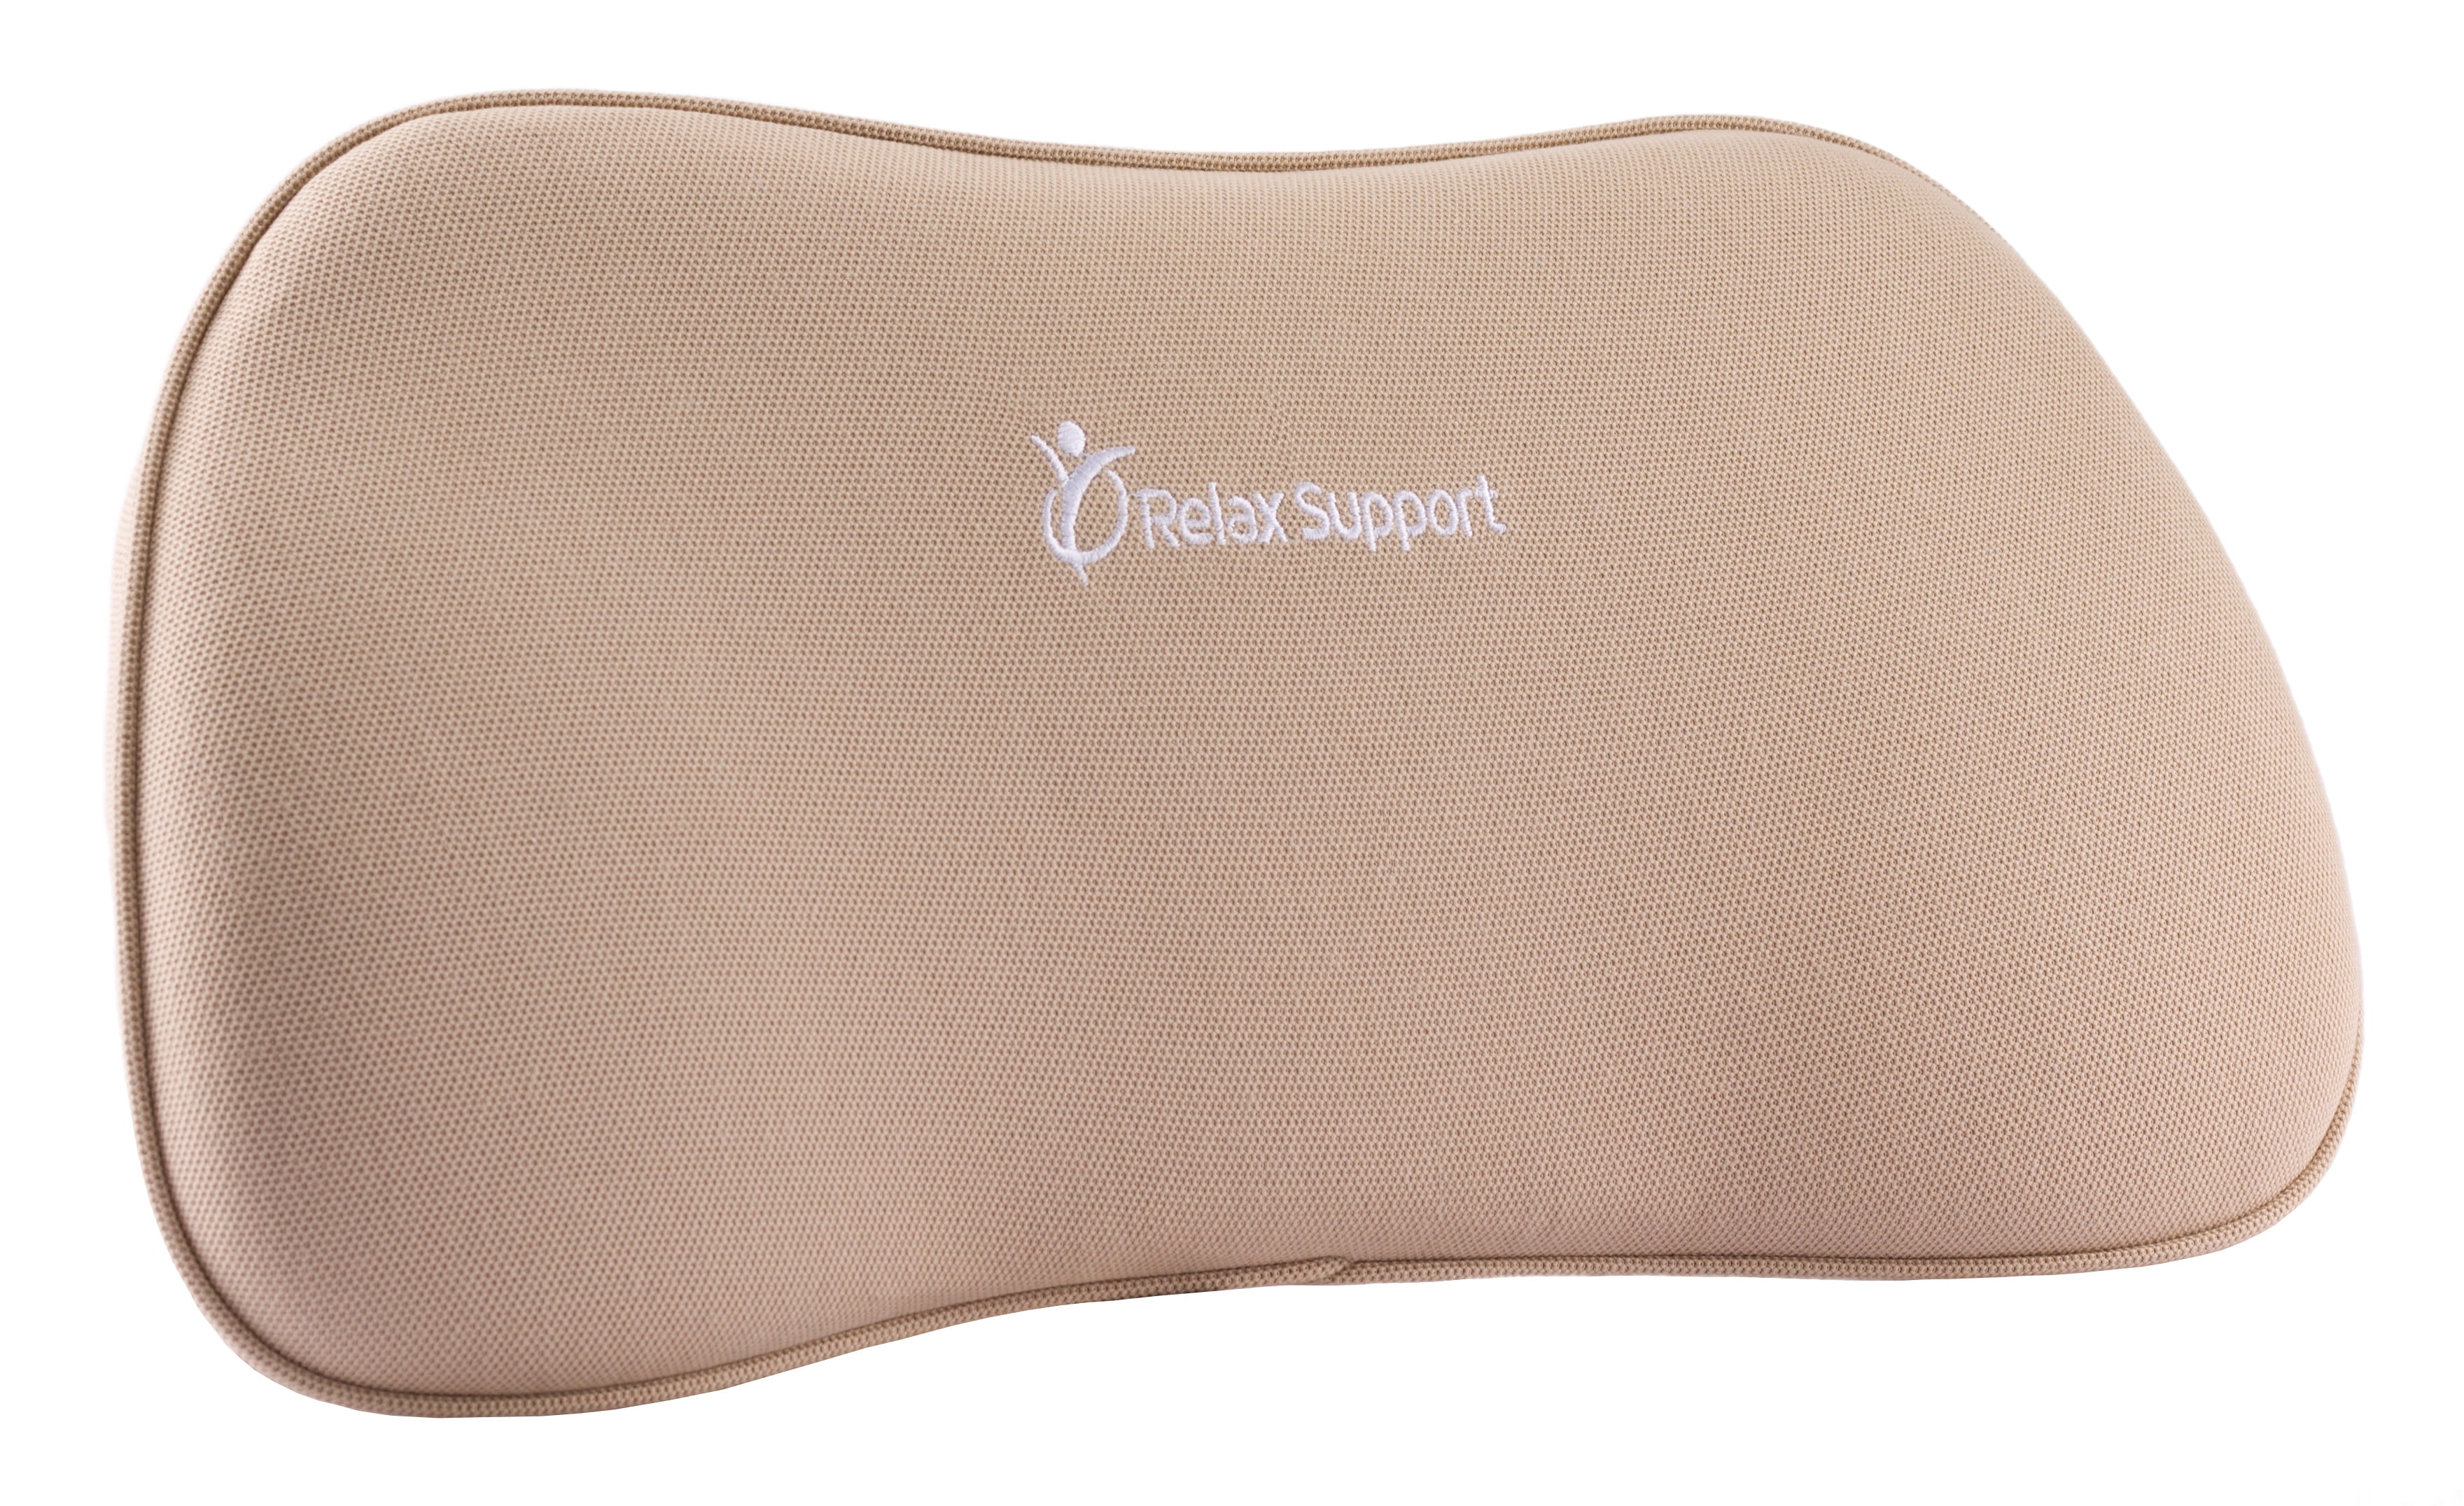  Relax Support RS11-X Lumbar Support Pillow - Medium Firm Memory  Foam Office Chair Back Support - Promotes Spinal Alignment & Better Posture  - Non-Slip Strap, Washable Cover - Fits Wheelchair, Recliner 